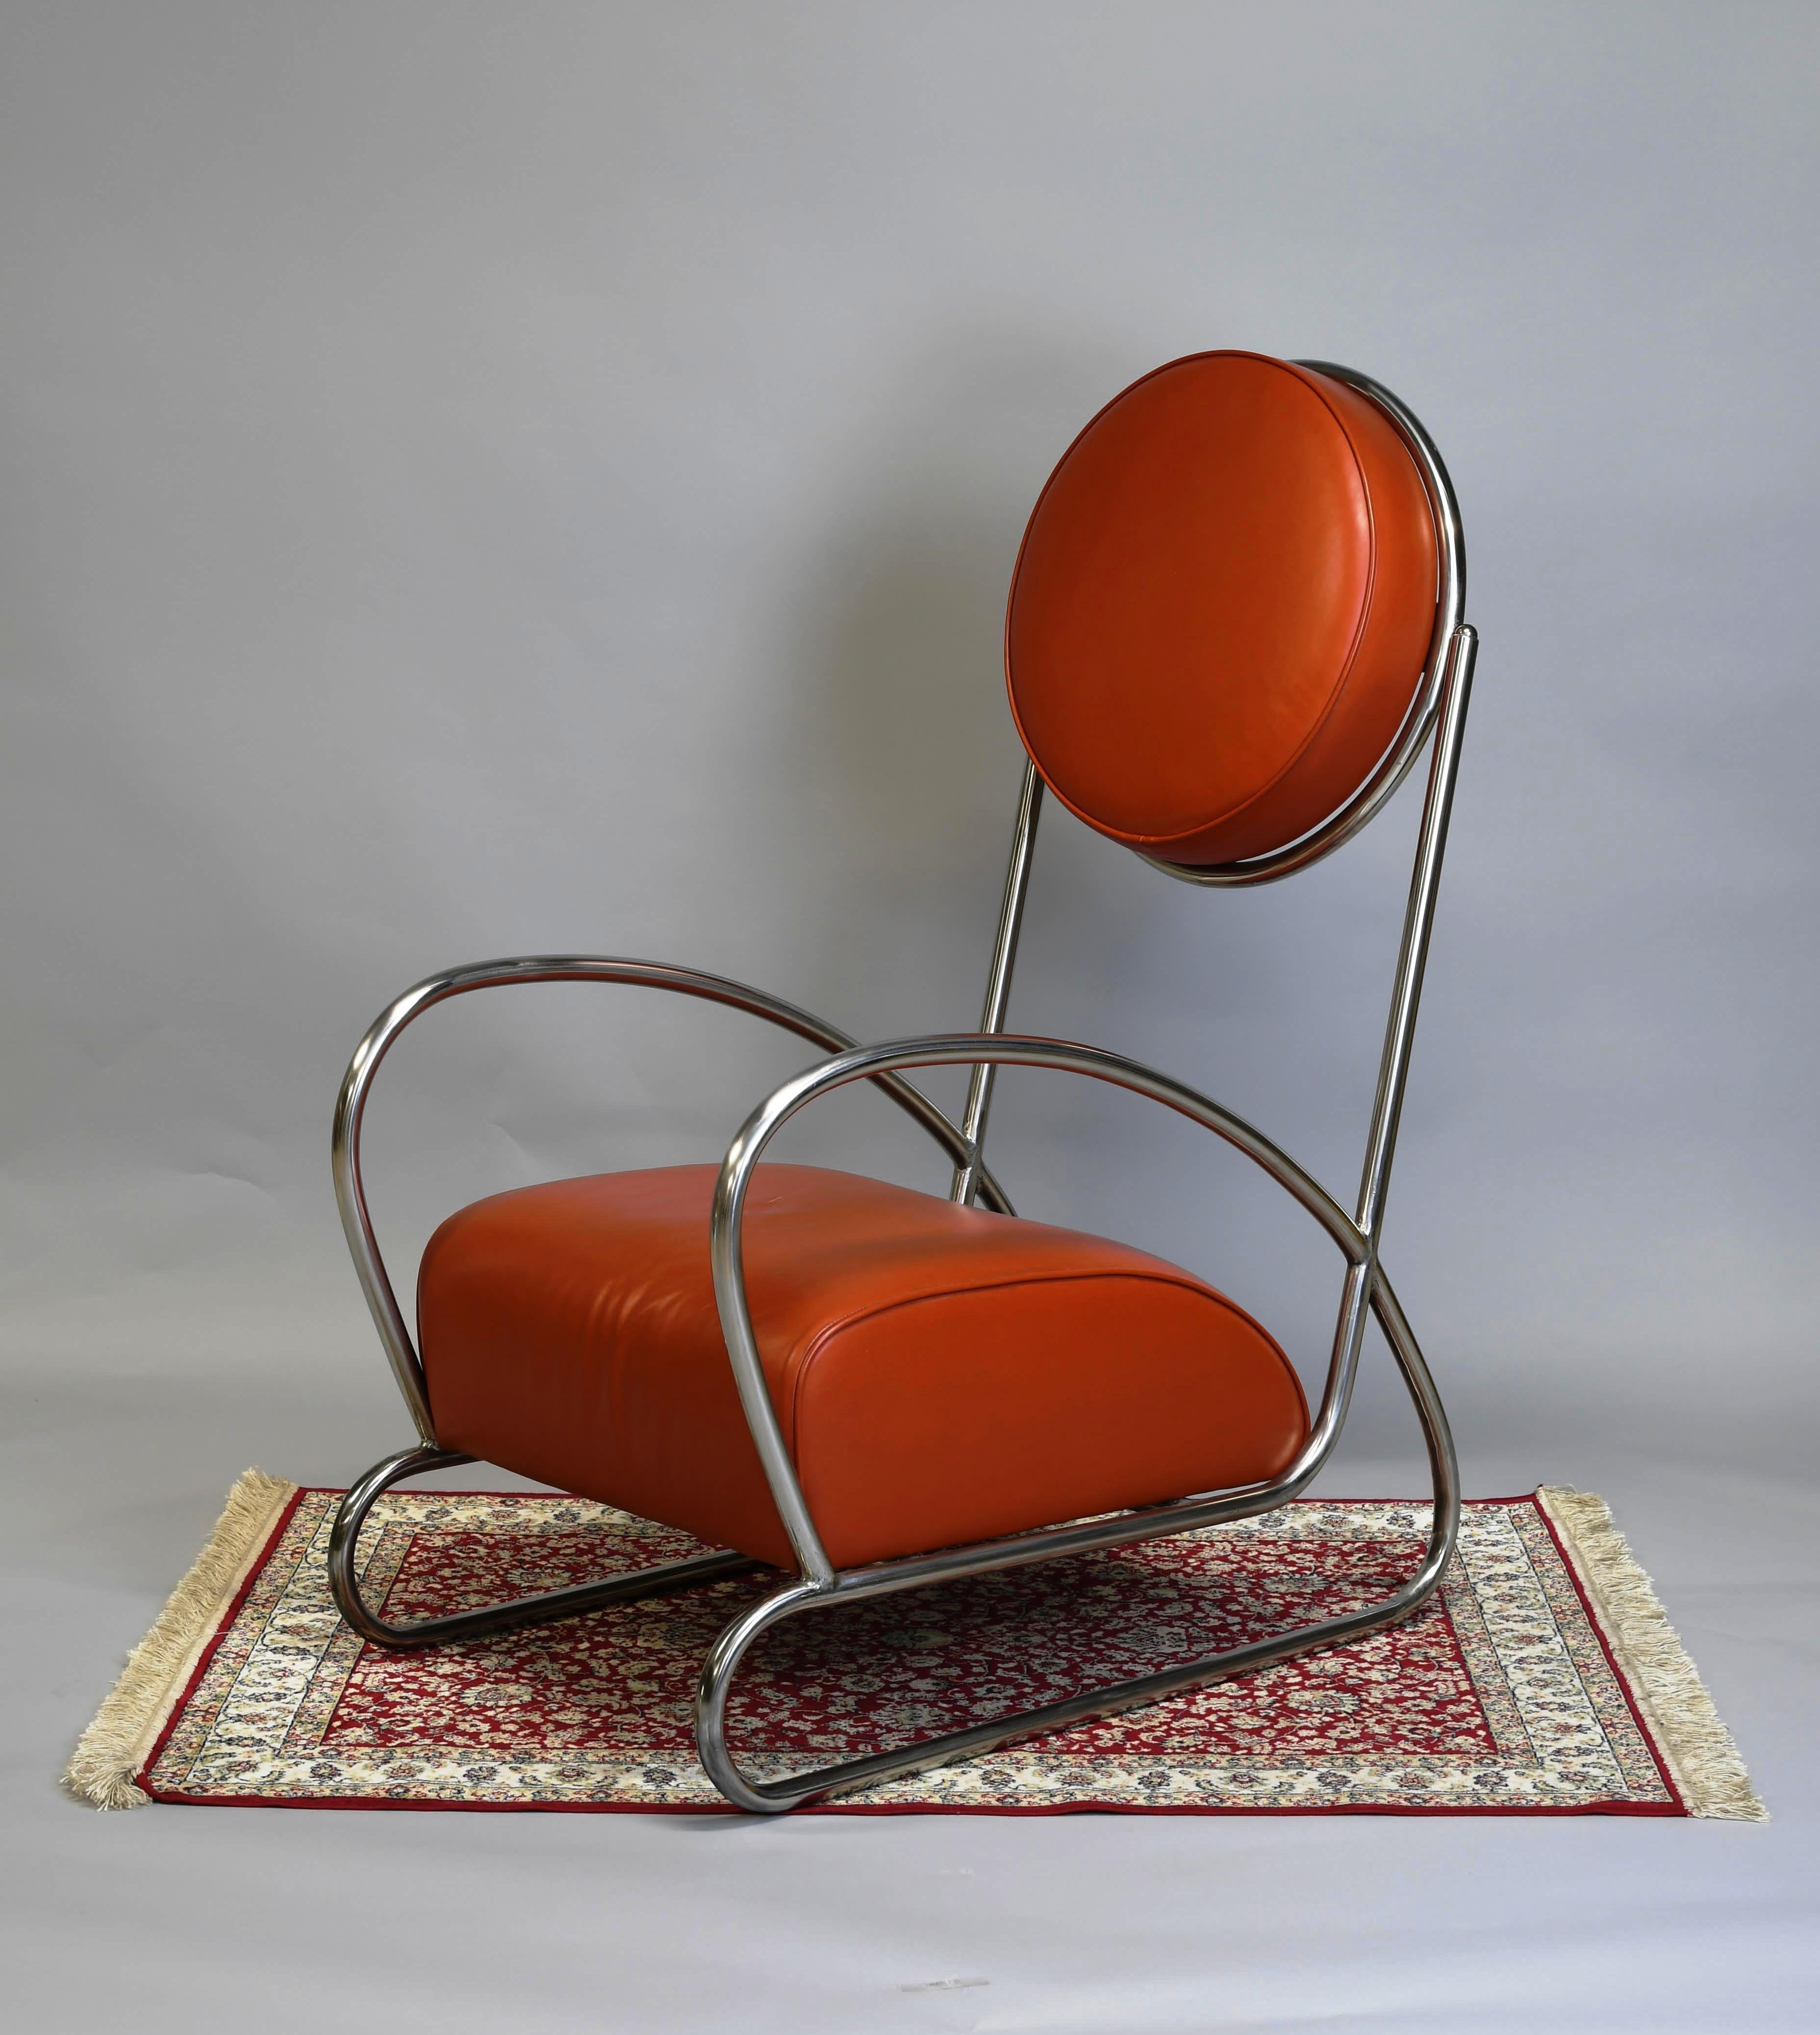 chrome-plated tubular armchair 1990s. in the art deco style by Hayek Gottwald. produced in the 1990s. chrome-plated metal tubing. skai upholstery.